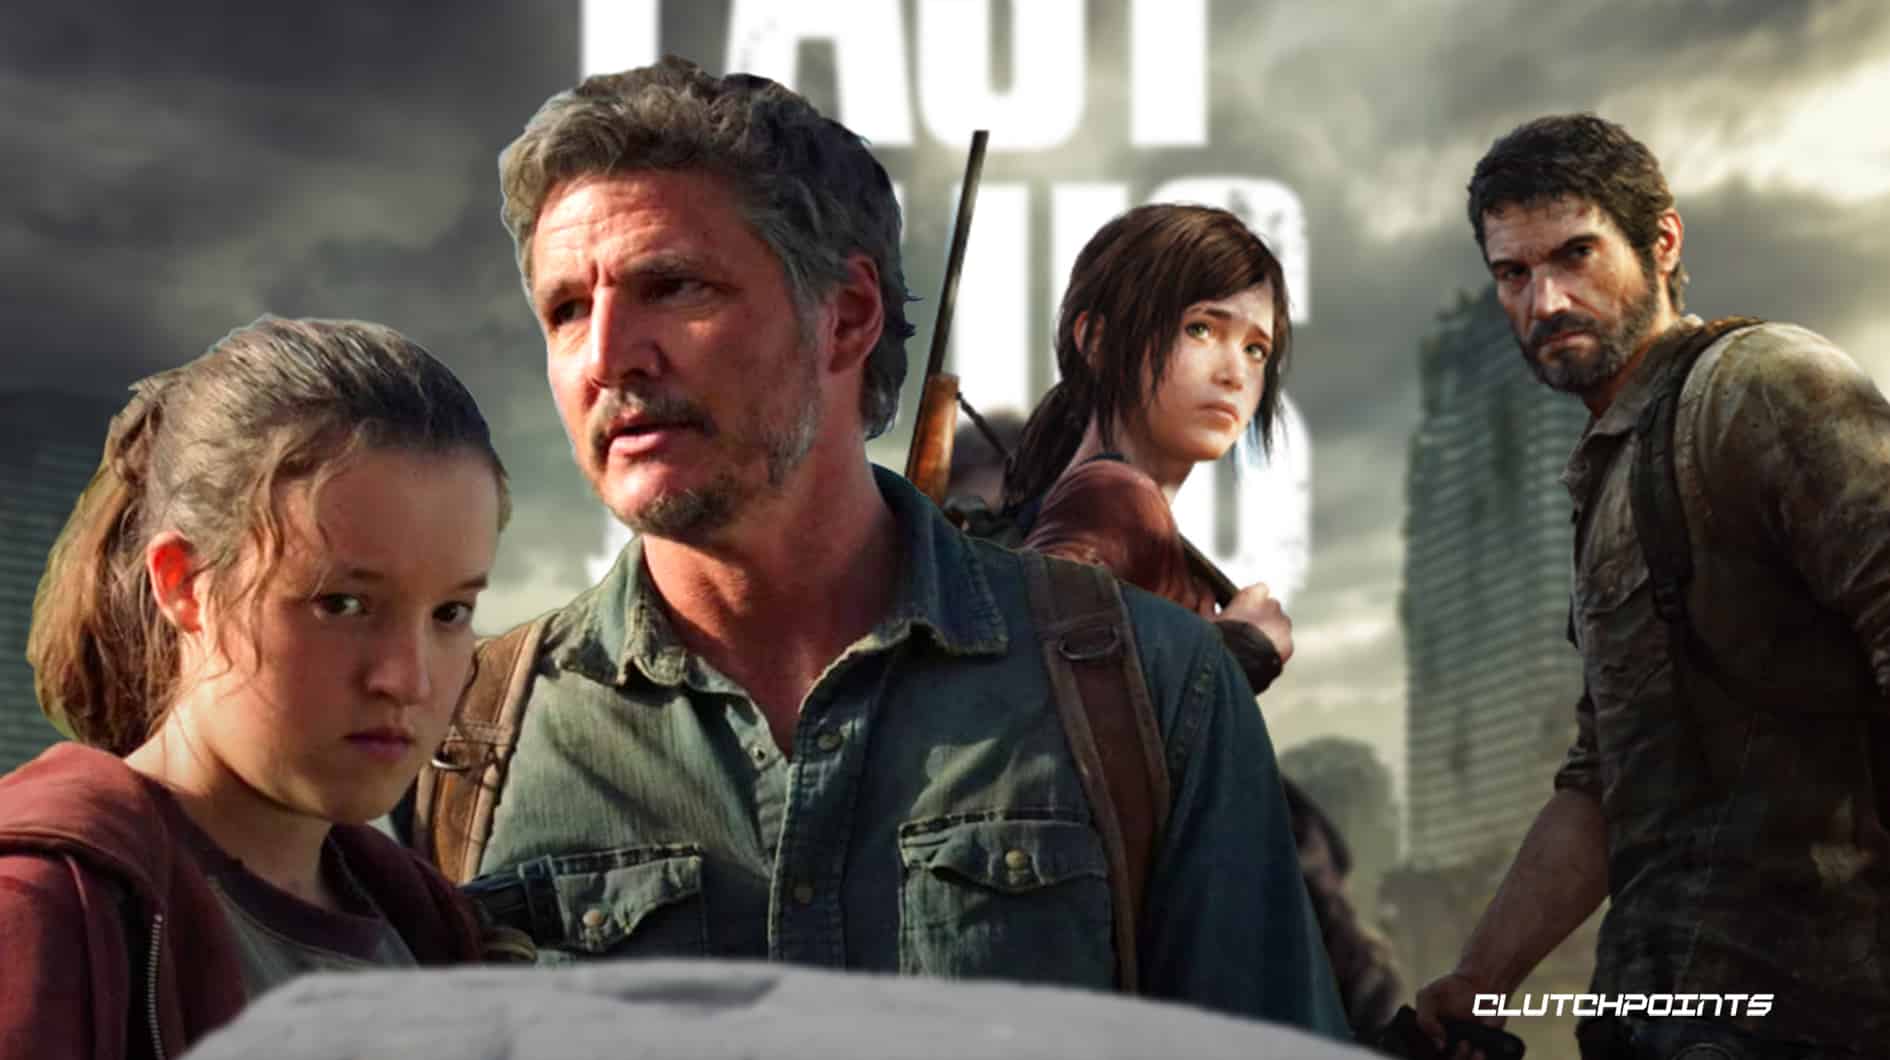 The Last of Us' HBO Series and Video Game: 5 Key Differences